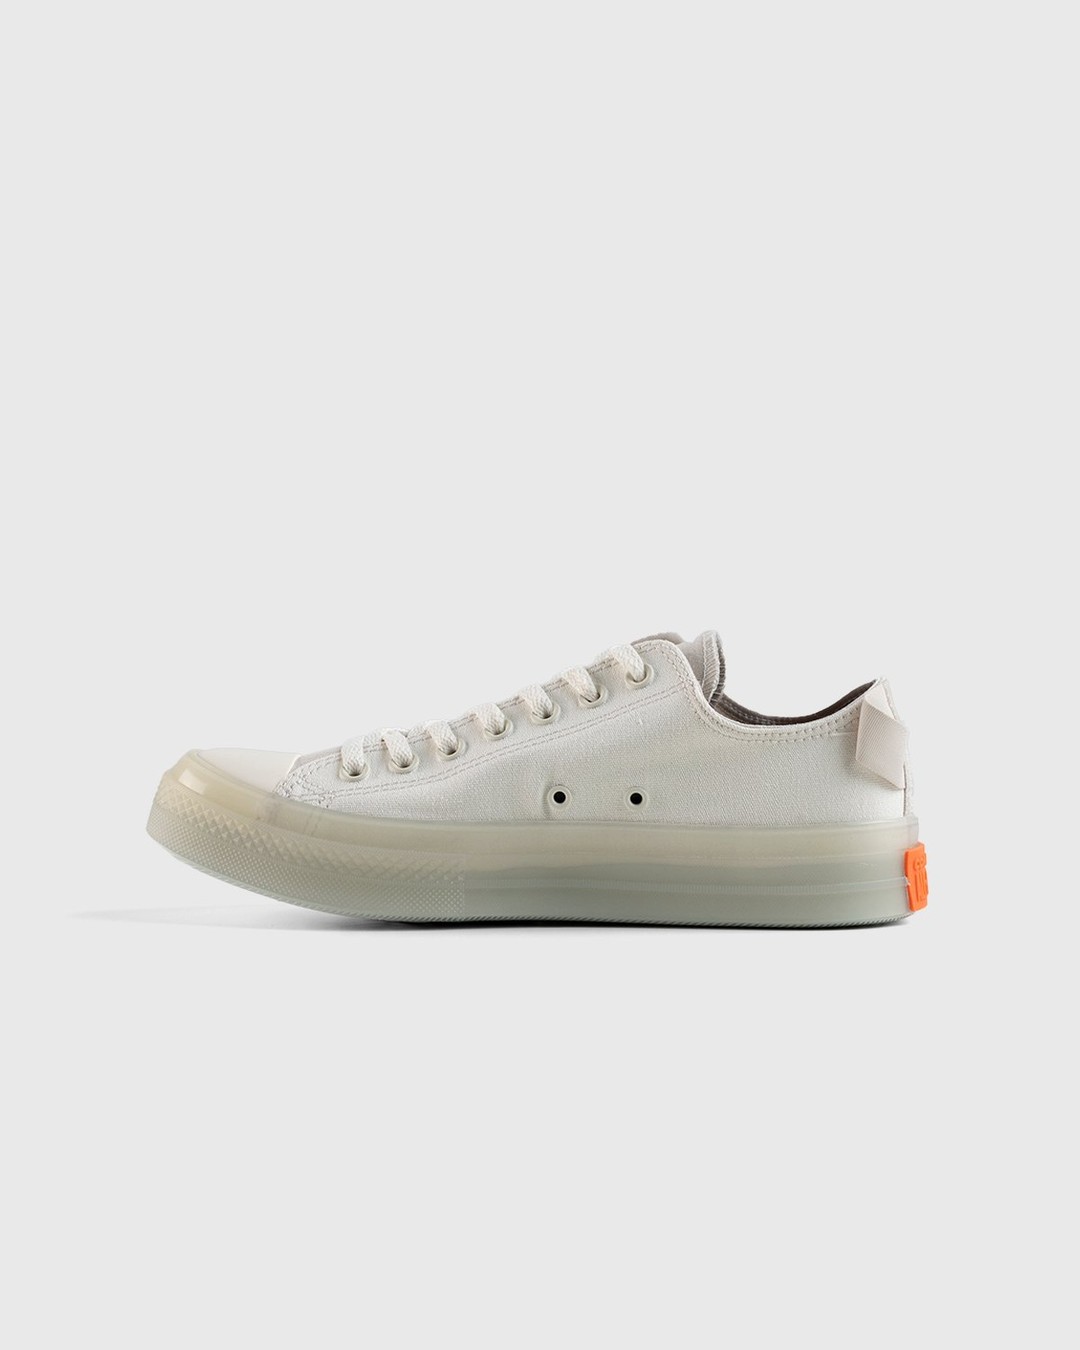 Converse – Chuck Taylor All Star CX Egret/Desert Sand - Low Top Sneakers - Grey - Image 2